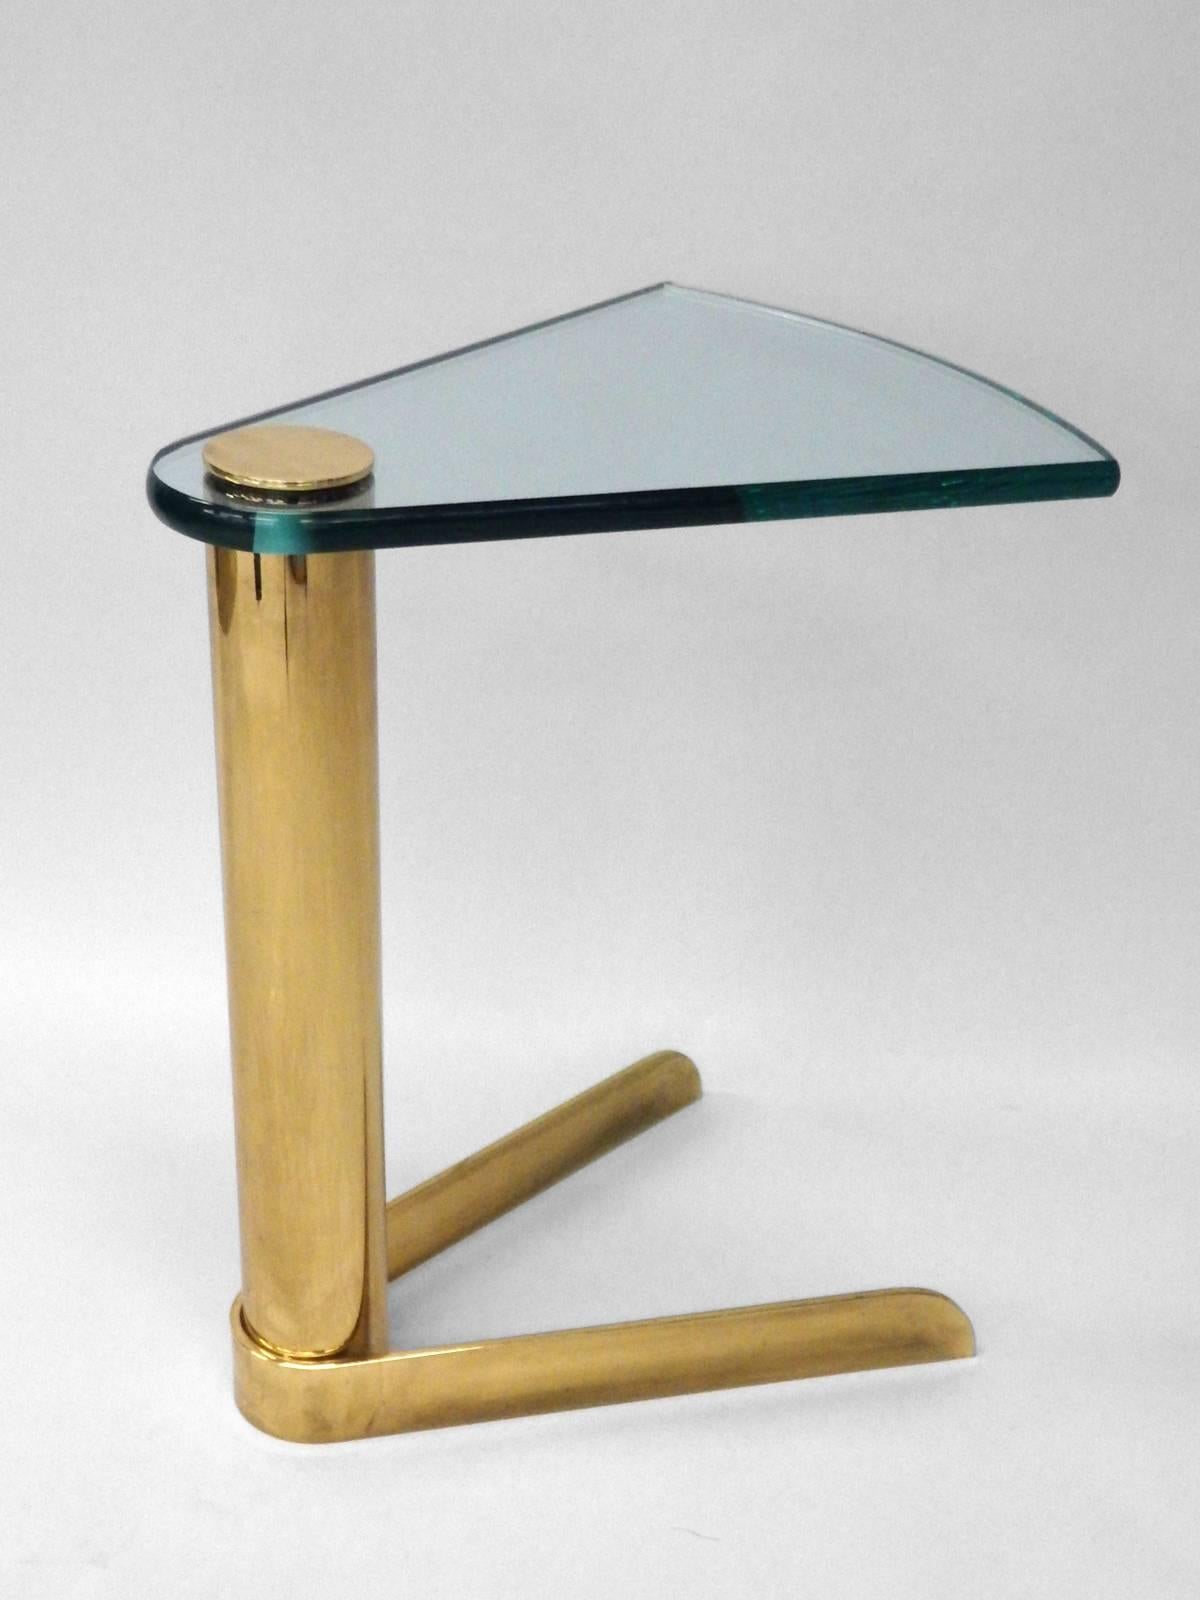 Pace glass wedge on brass occasional table. Pace Collection.